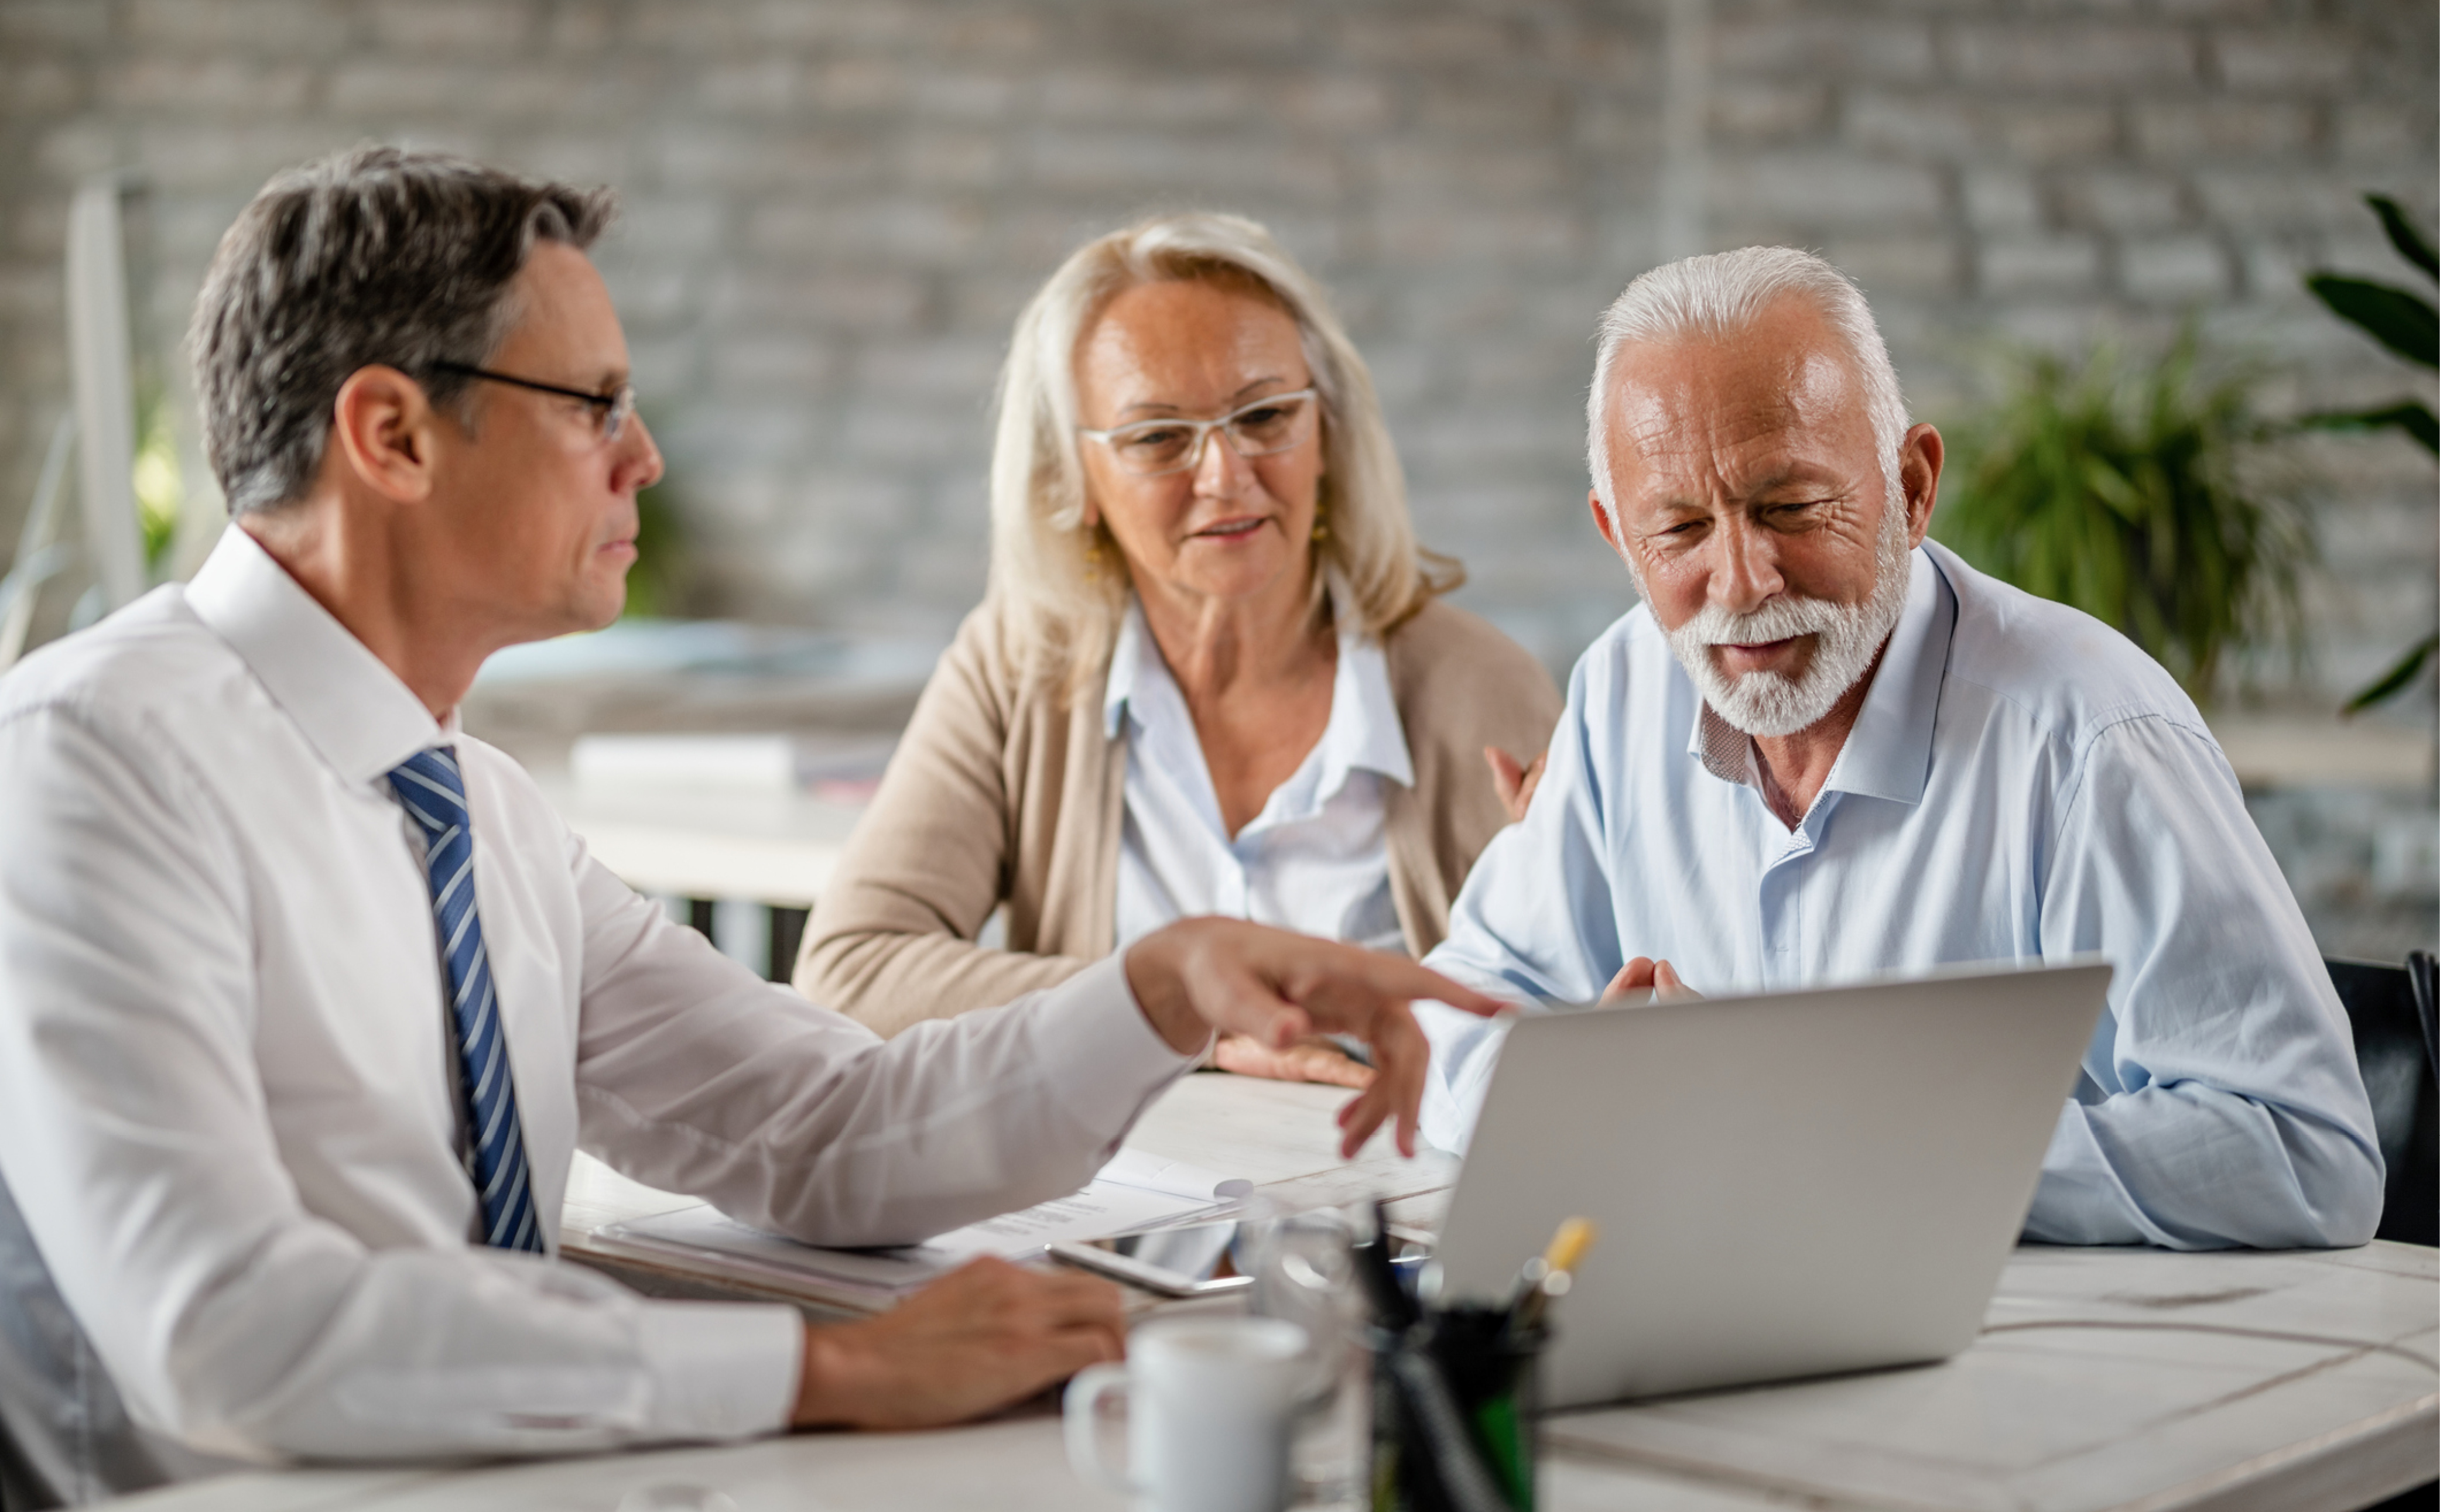 Reverse Mortgage Loans: Imaginative Ways They Can Be Used in Retirement Planning